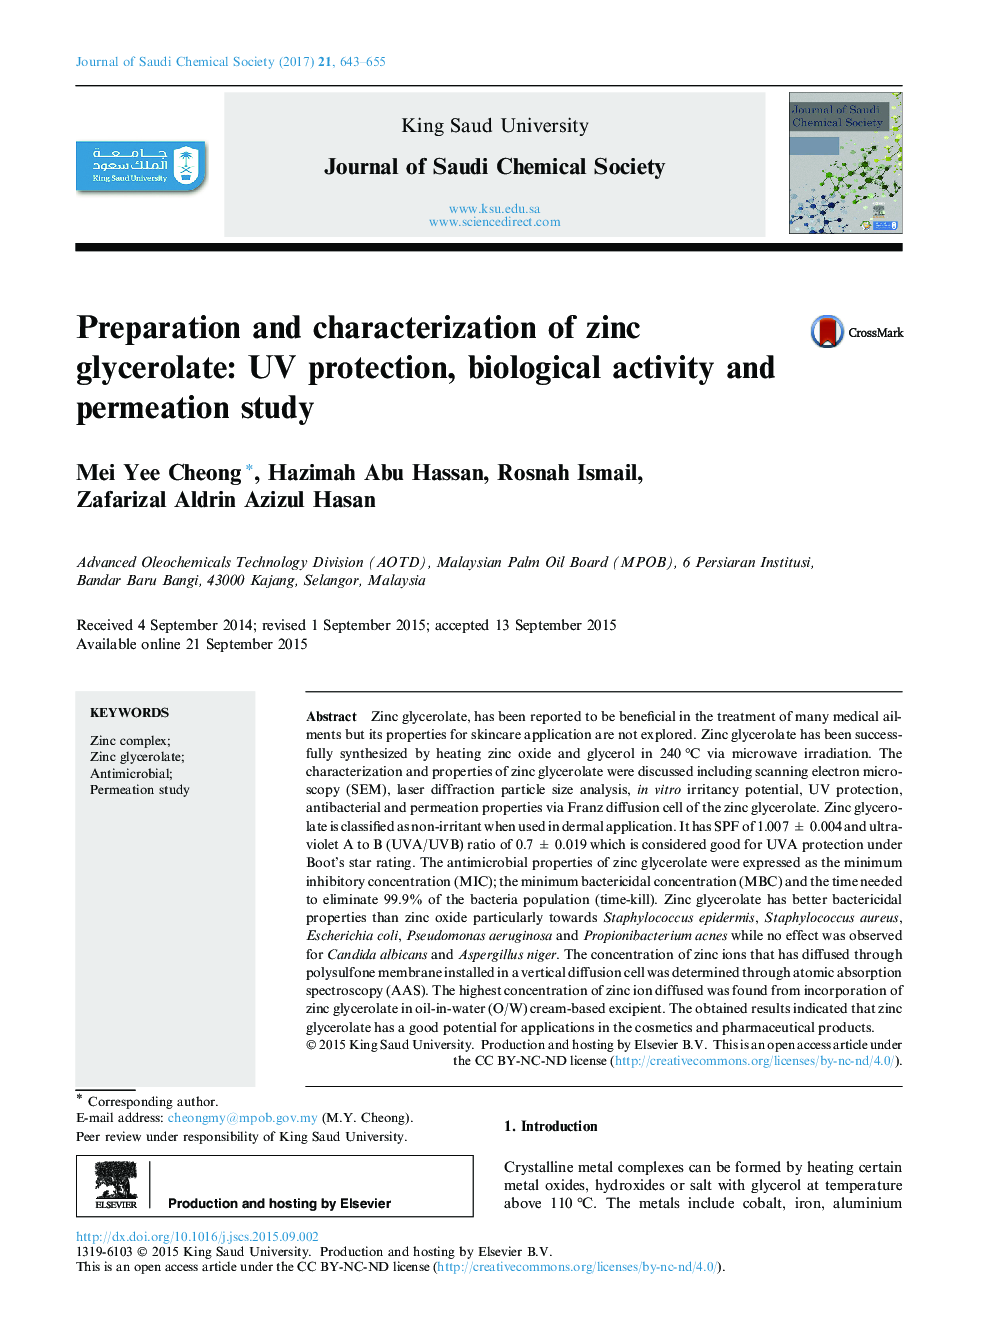 Preparation and characterization of zinc glycerolate: UV protection, biological activity and permeation study